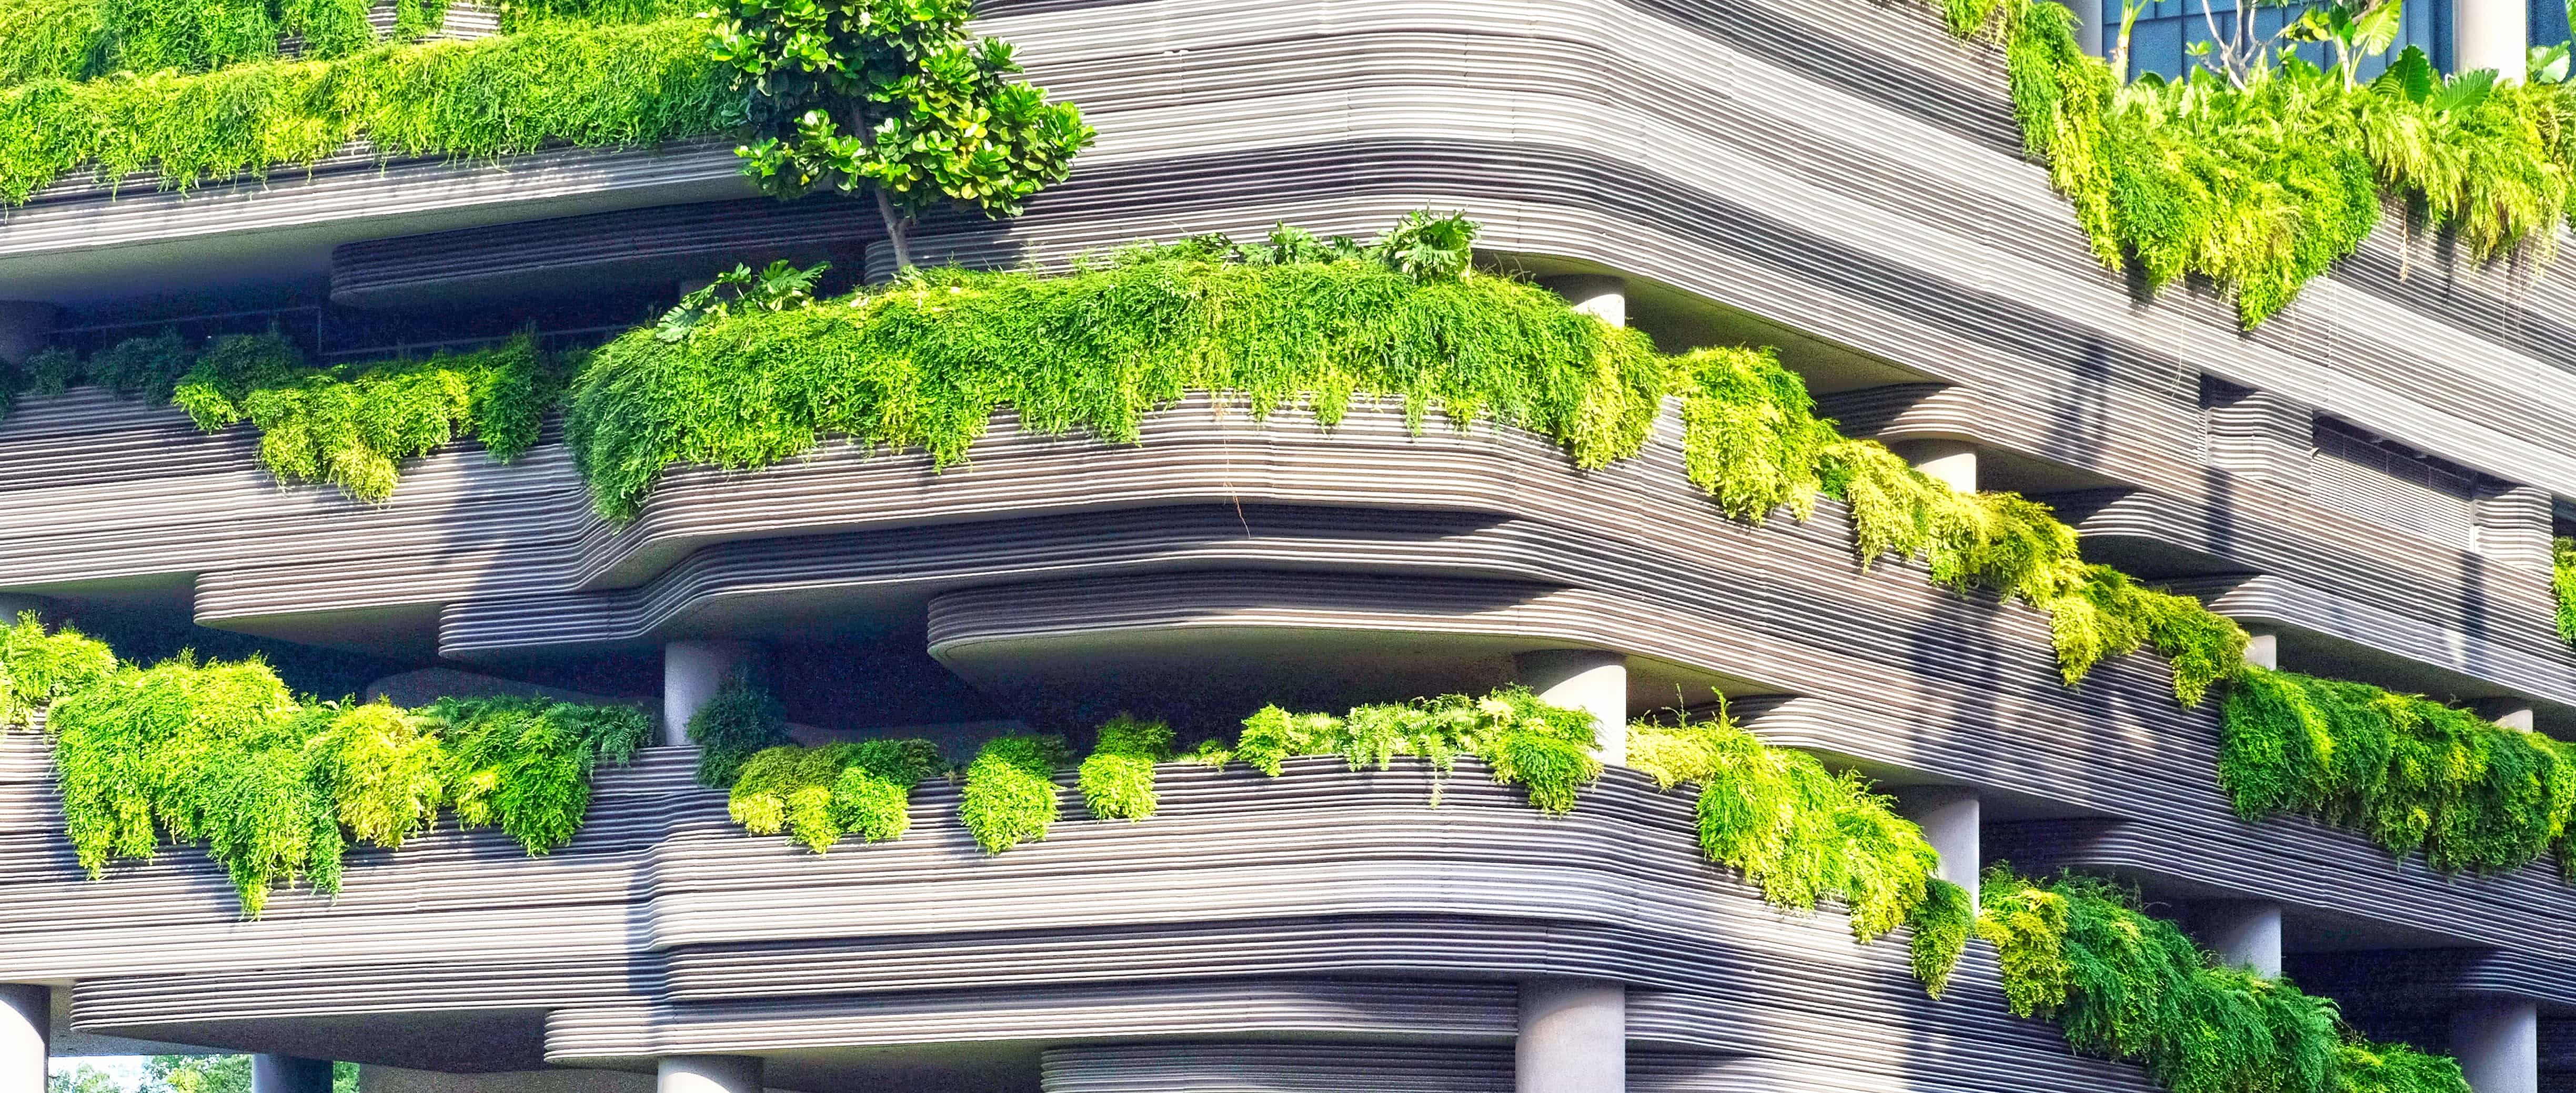 The Benefits of Sustainable Construction